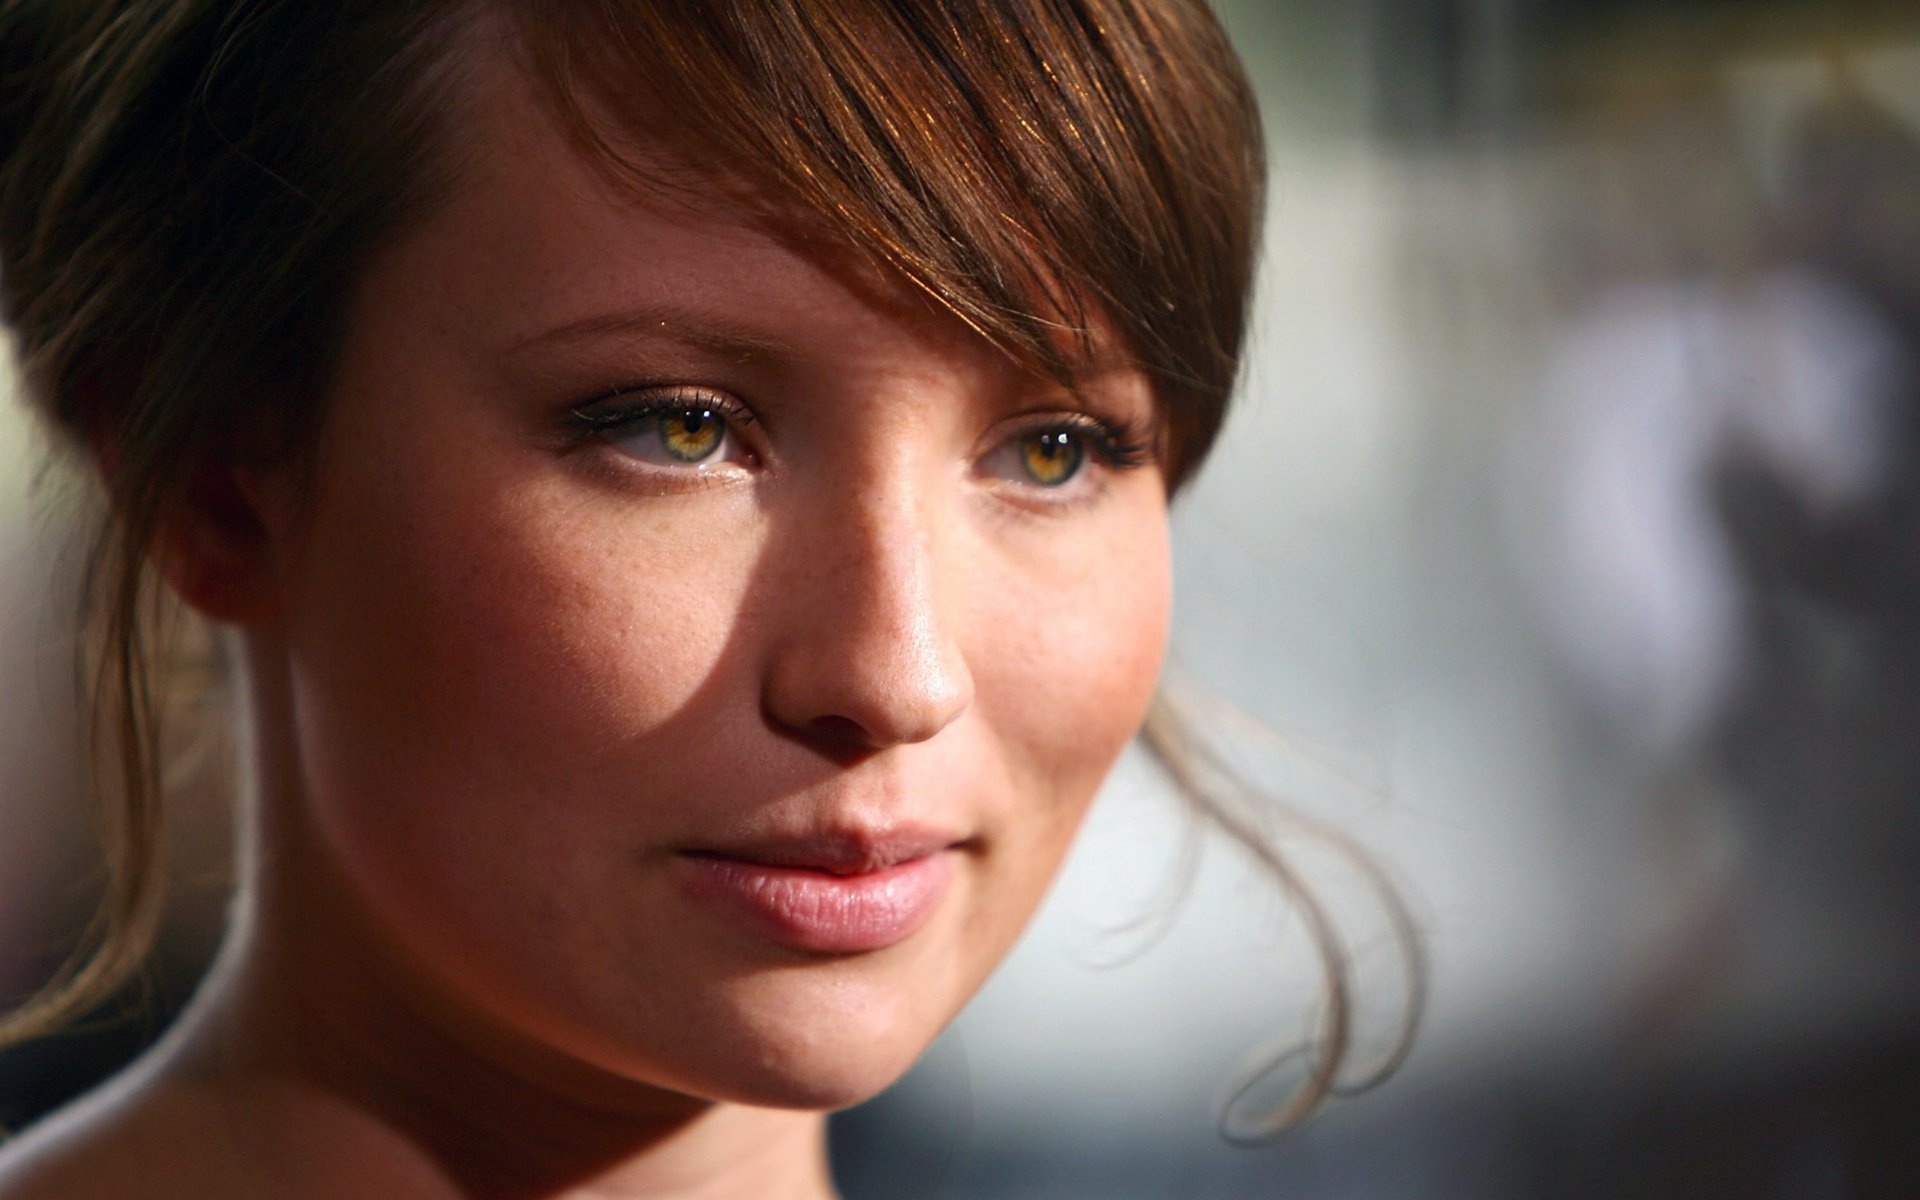 Emily Browning HD wallpaper, Background image, High-resolution picture, Stunning beauty, 1920x1200 HD Desktop